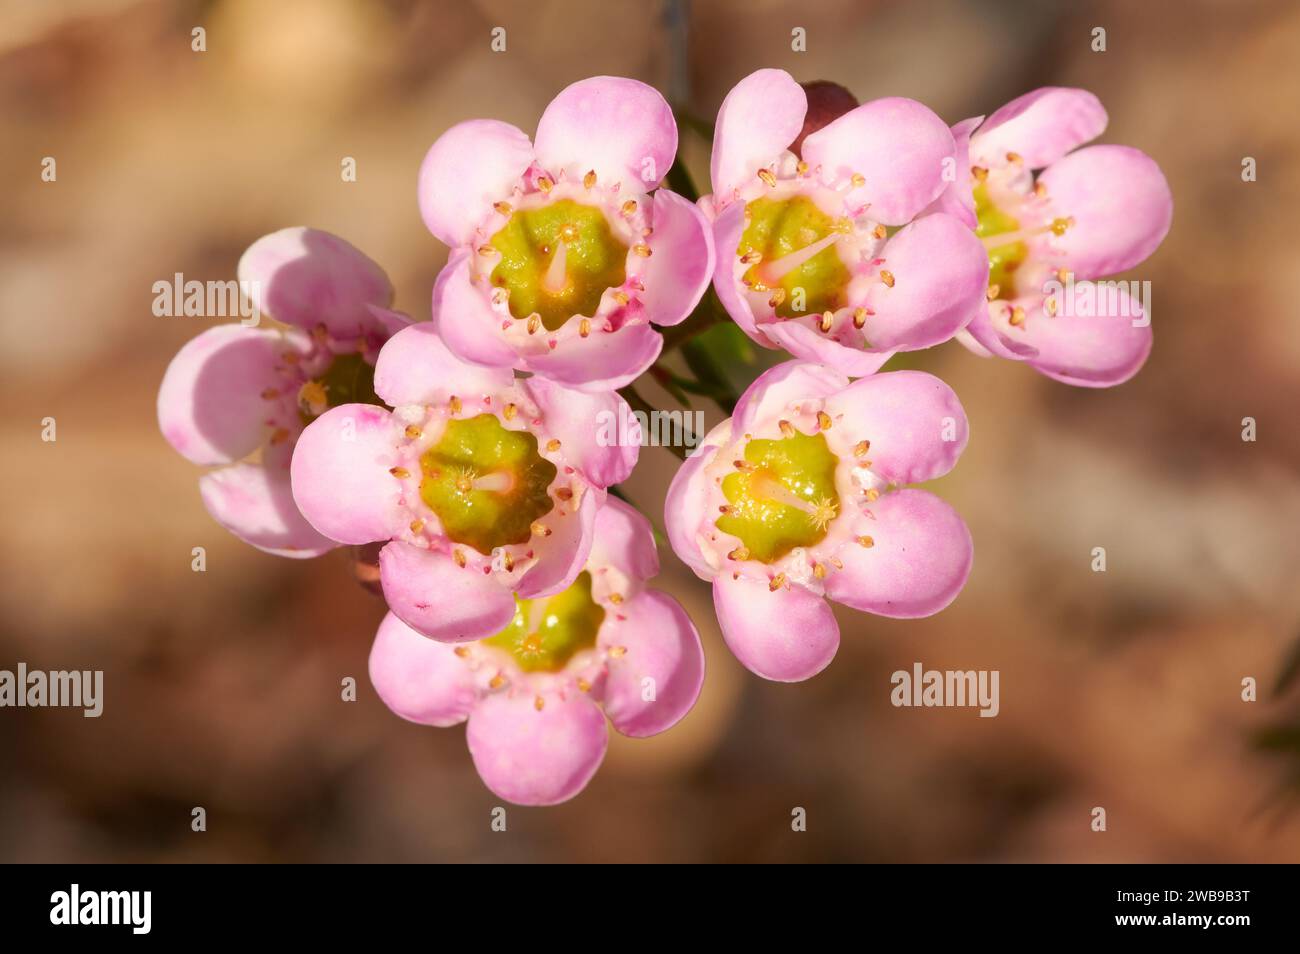 A native Australian waxflower, variety of Chamelaucium, with pink and white petals and green centres, commonly used in the cut flower industry. Stock Photo